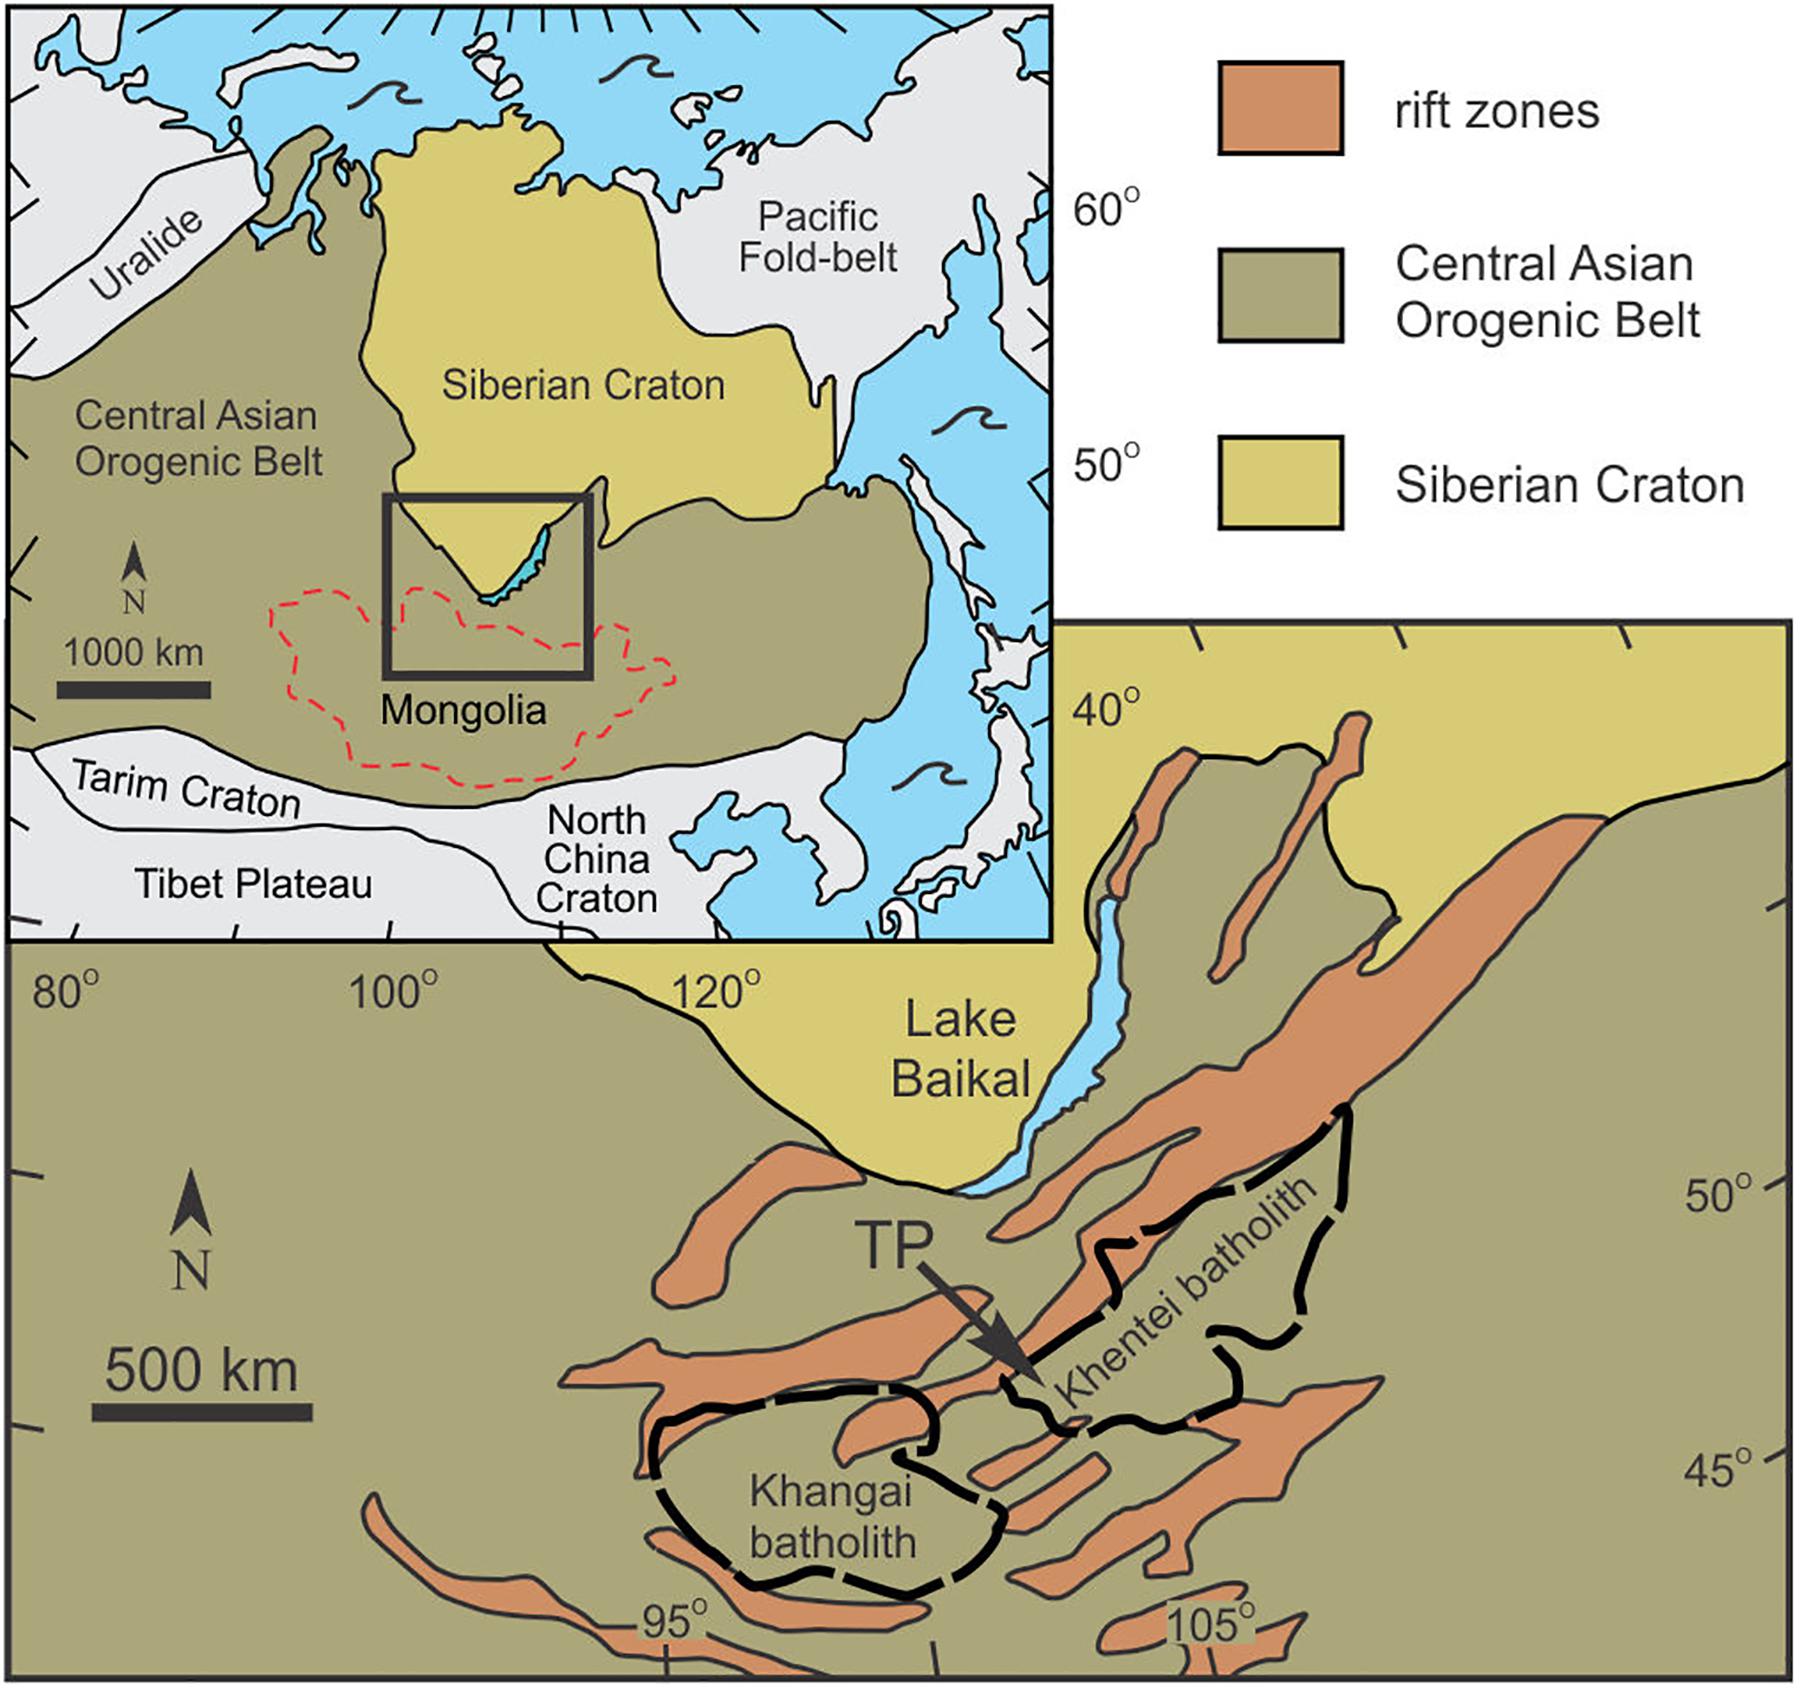 The Altai-Mongolia terrane in the Central Asian Orogenic Belt